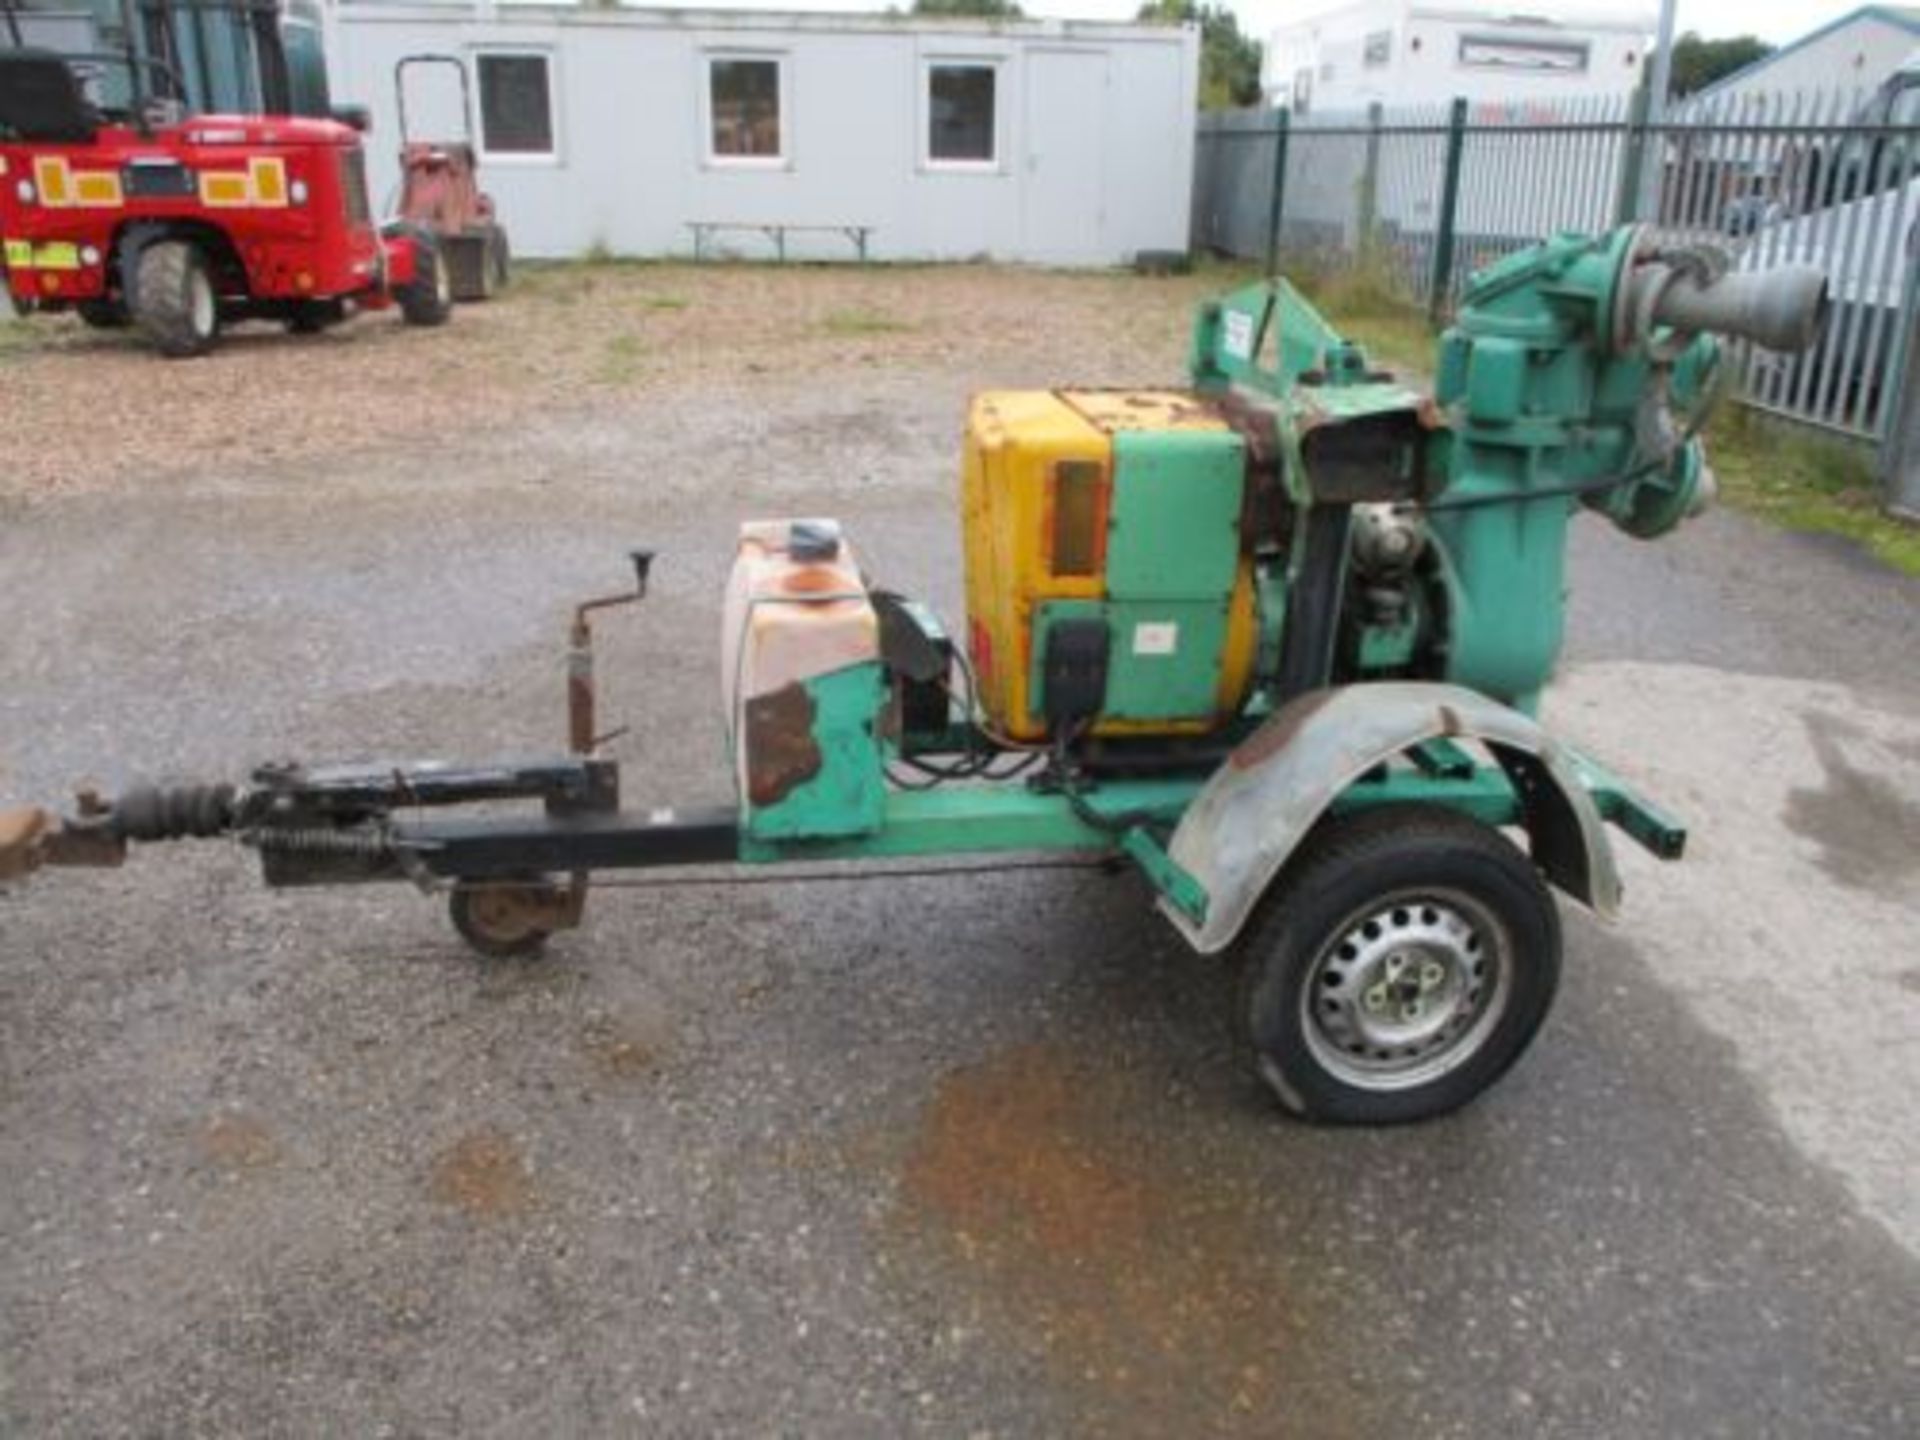 HILTA HYDRY 4 INCH " TOWABLE WATER PUMP HATZ DIESEL ENGINE DELIVERY ARRANGED - Image 4 of 5